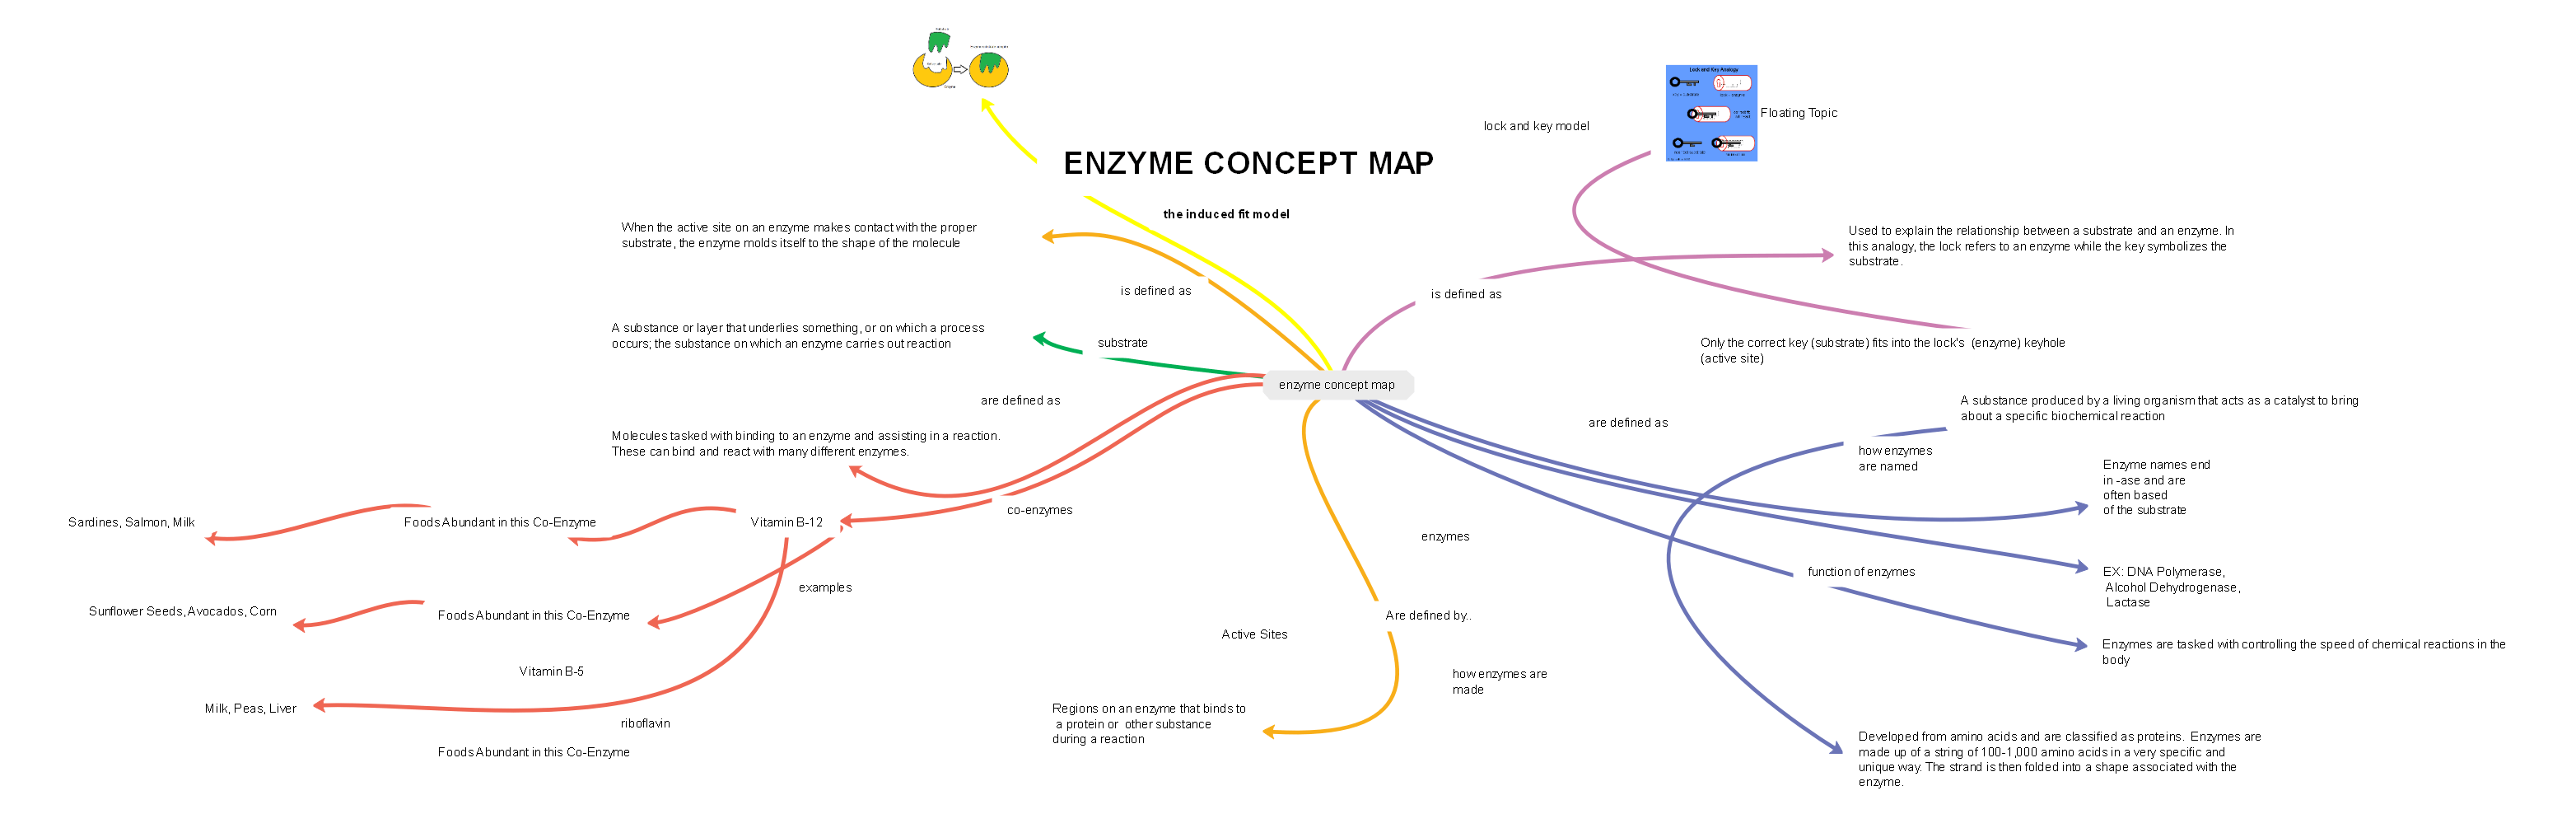 Enzyme Concept Map